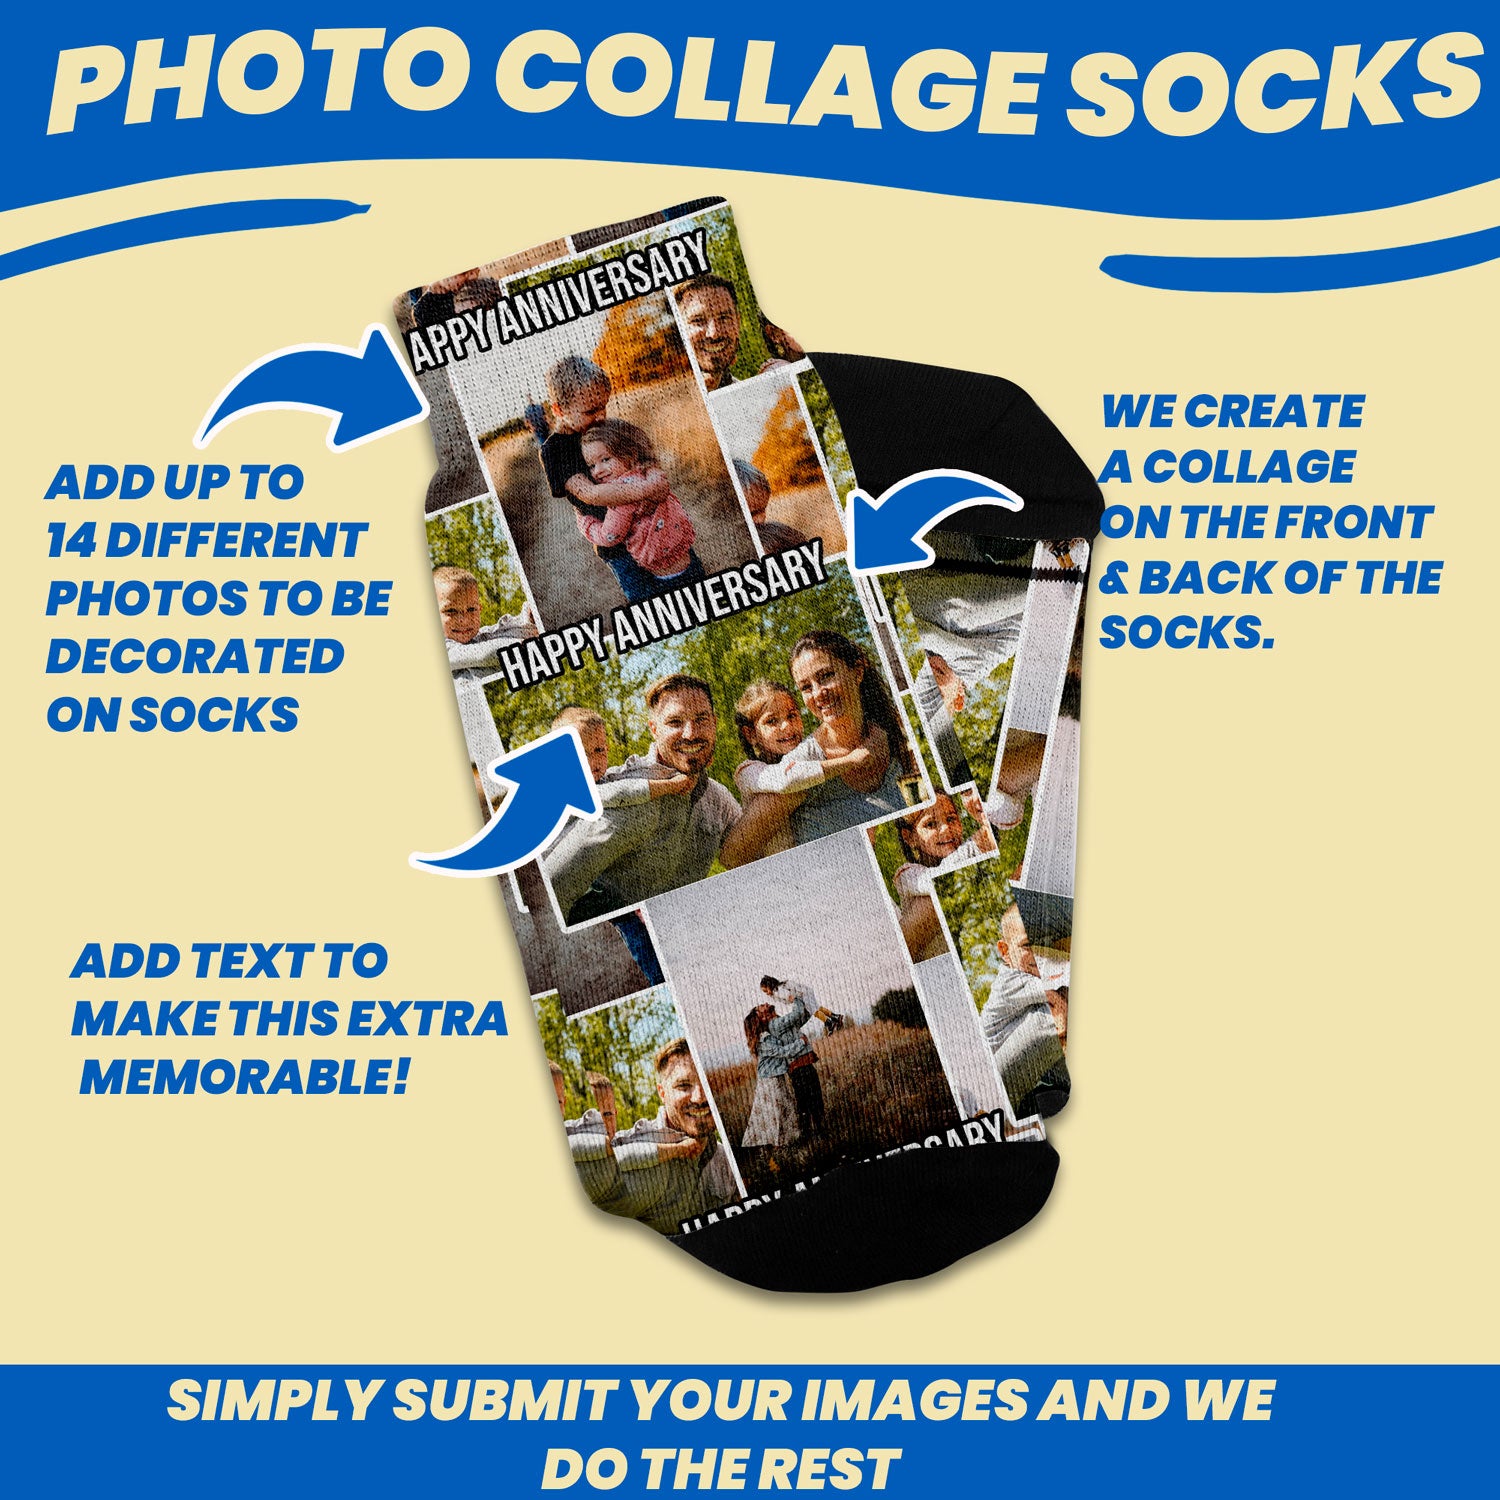 personalized photo collage gift socks with text design features such as 14 photos to decorate on socks and adding text